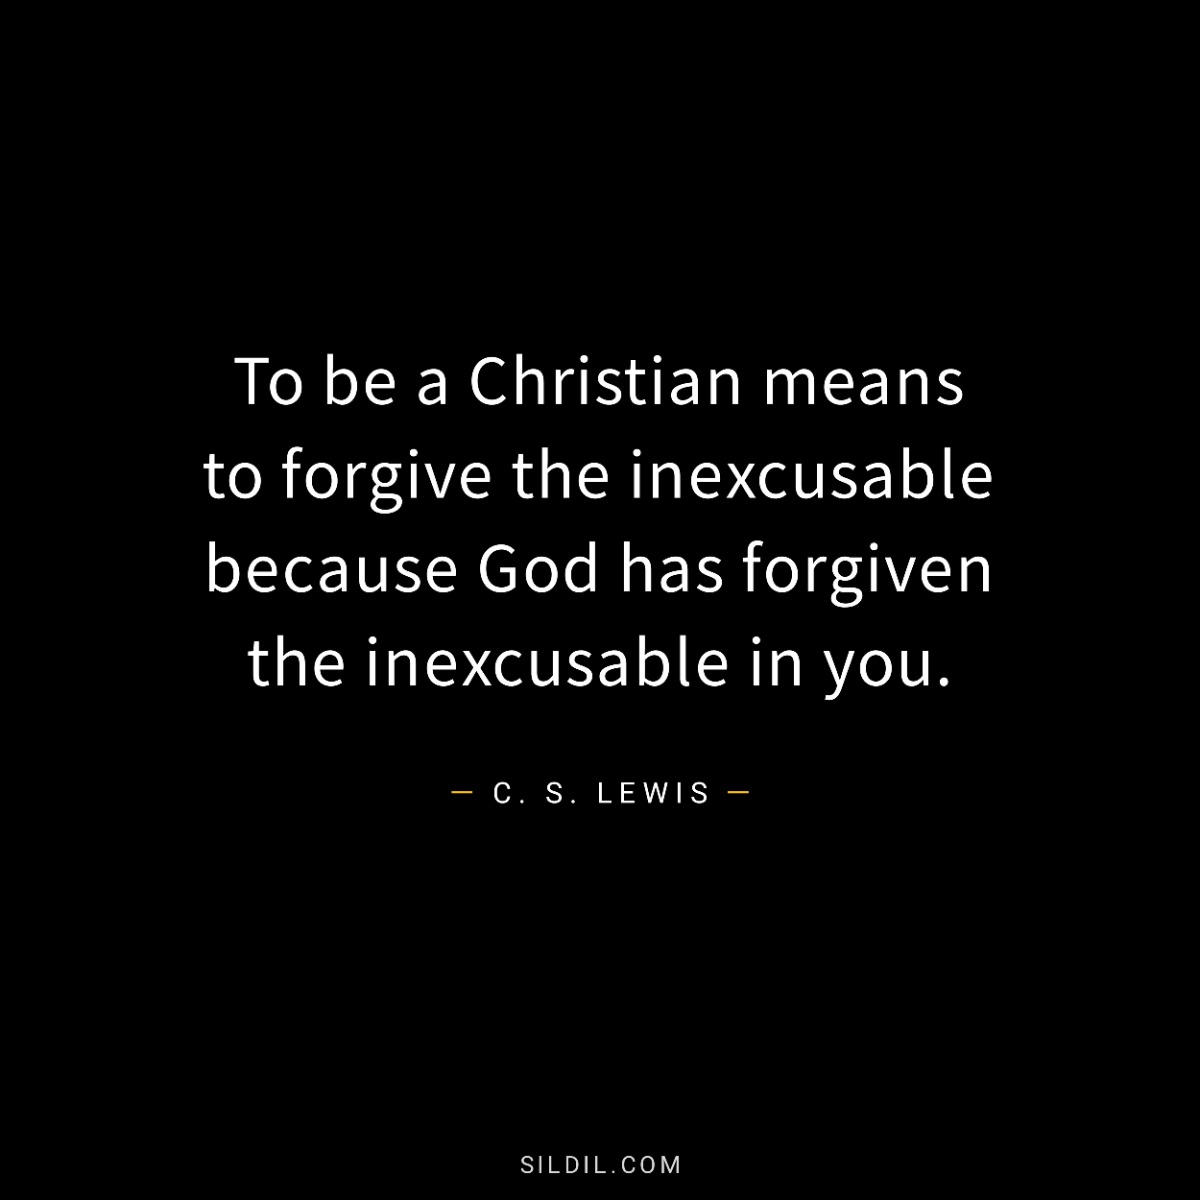 To be a Christian means to forgive the inexcusable because God has forgiven the inexcusable in you.